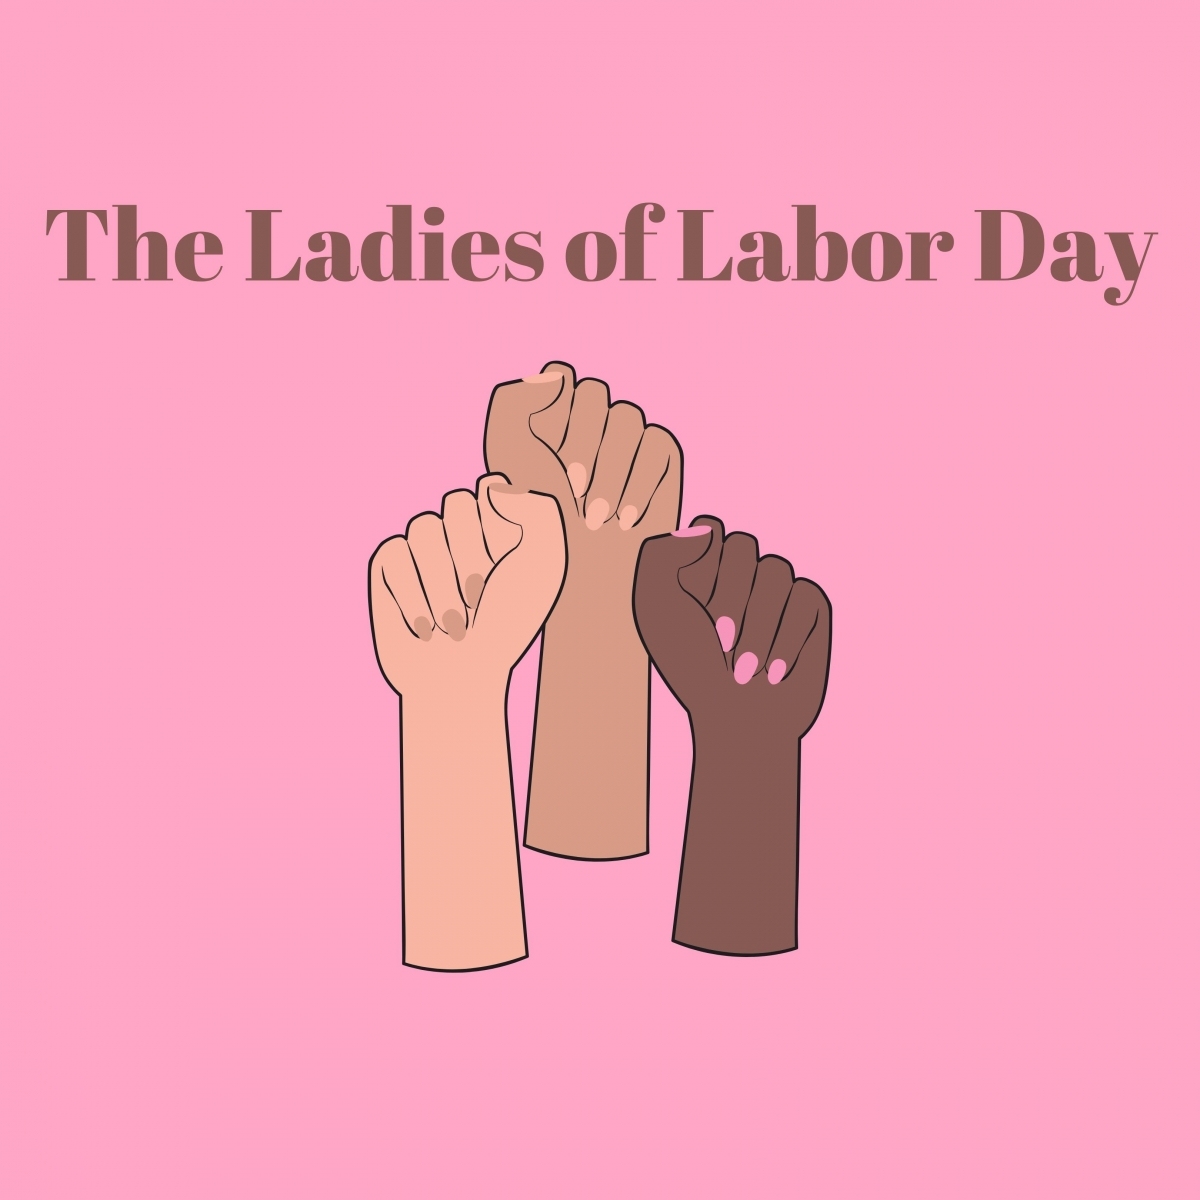 The Ladies of Labor Day